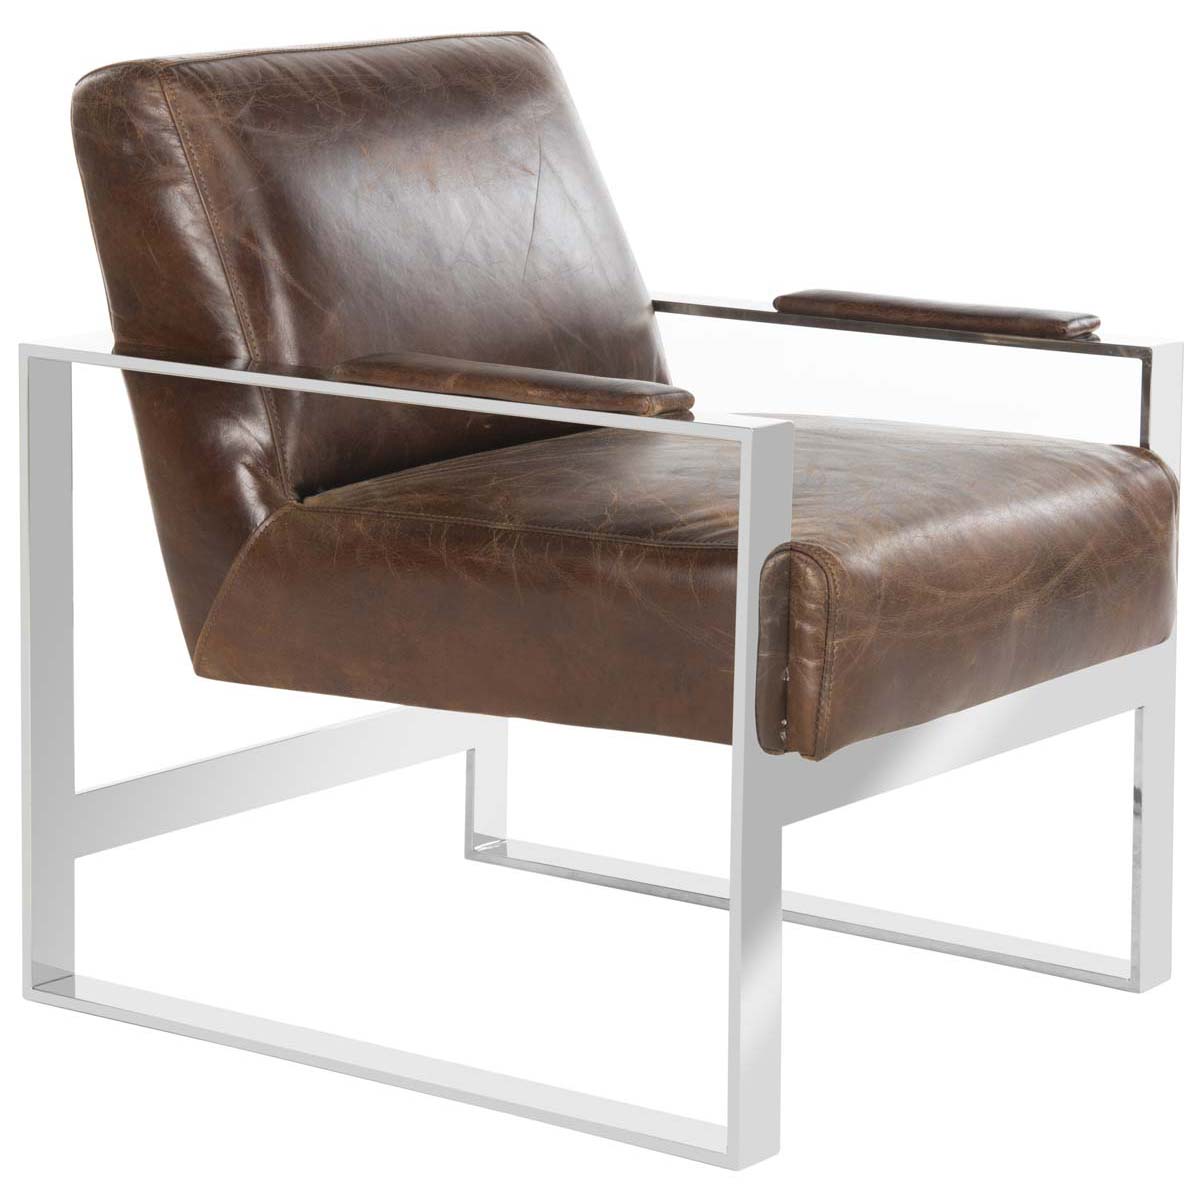 Safavieh Couture Parkgate Occassional Leather Chair